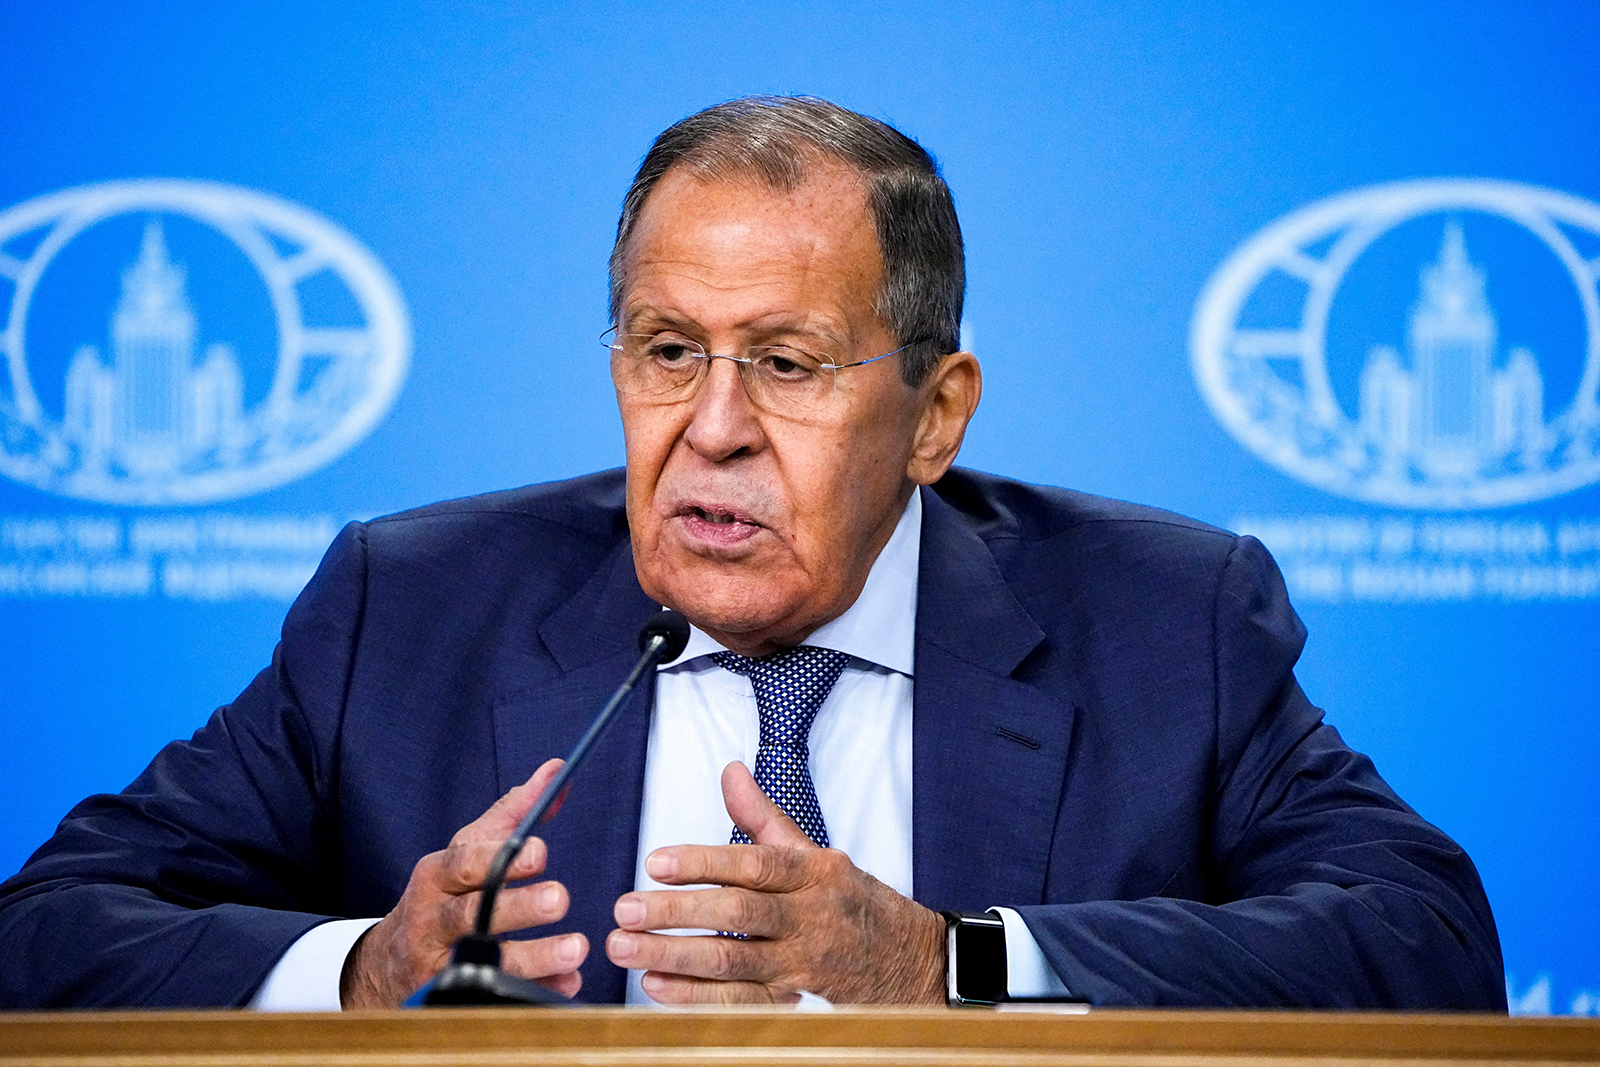 Russia's Foreign Minister Sergei Lavrov delivers his speech in Moscow on September 19.